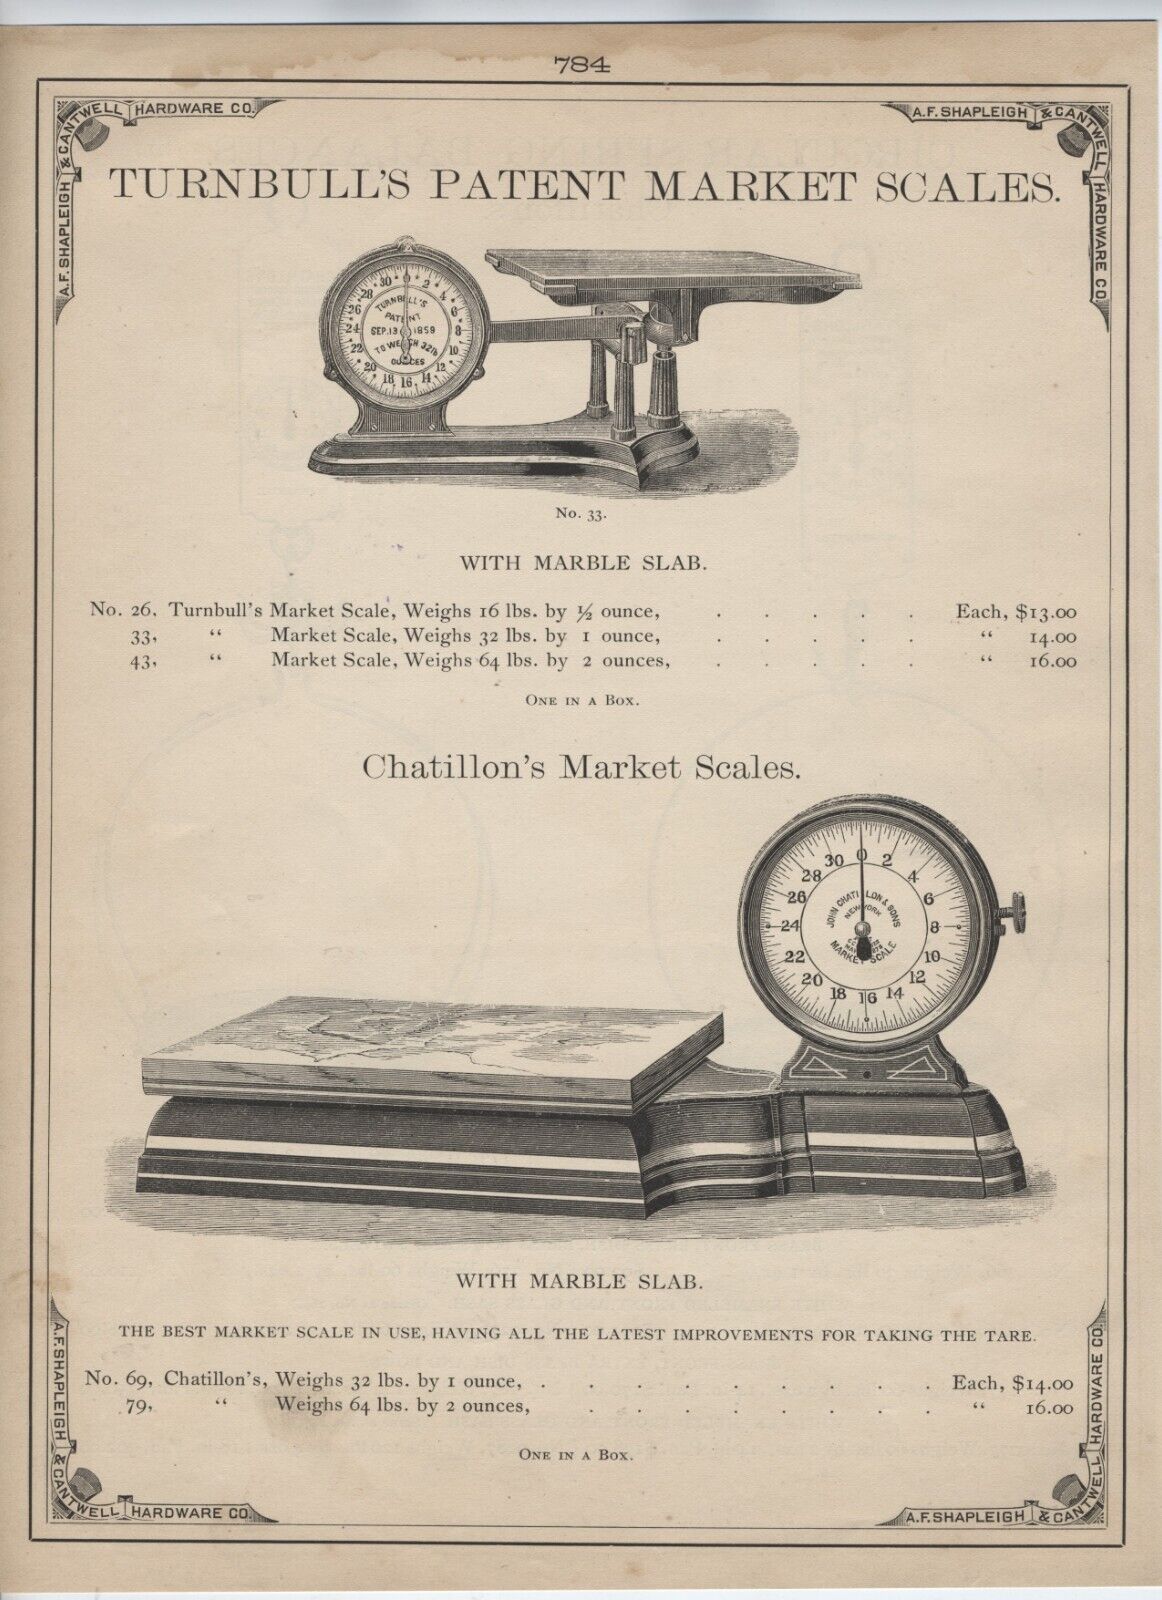 1883 CATALOG PAGE A F SHAPLEIGH HARDWARE. ST. LOUIS MISSOURI, MARKET SCALES